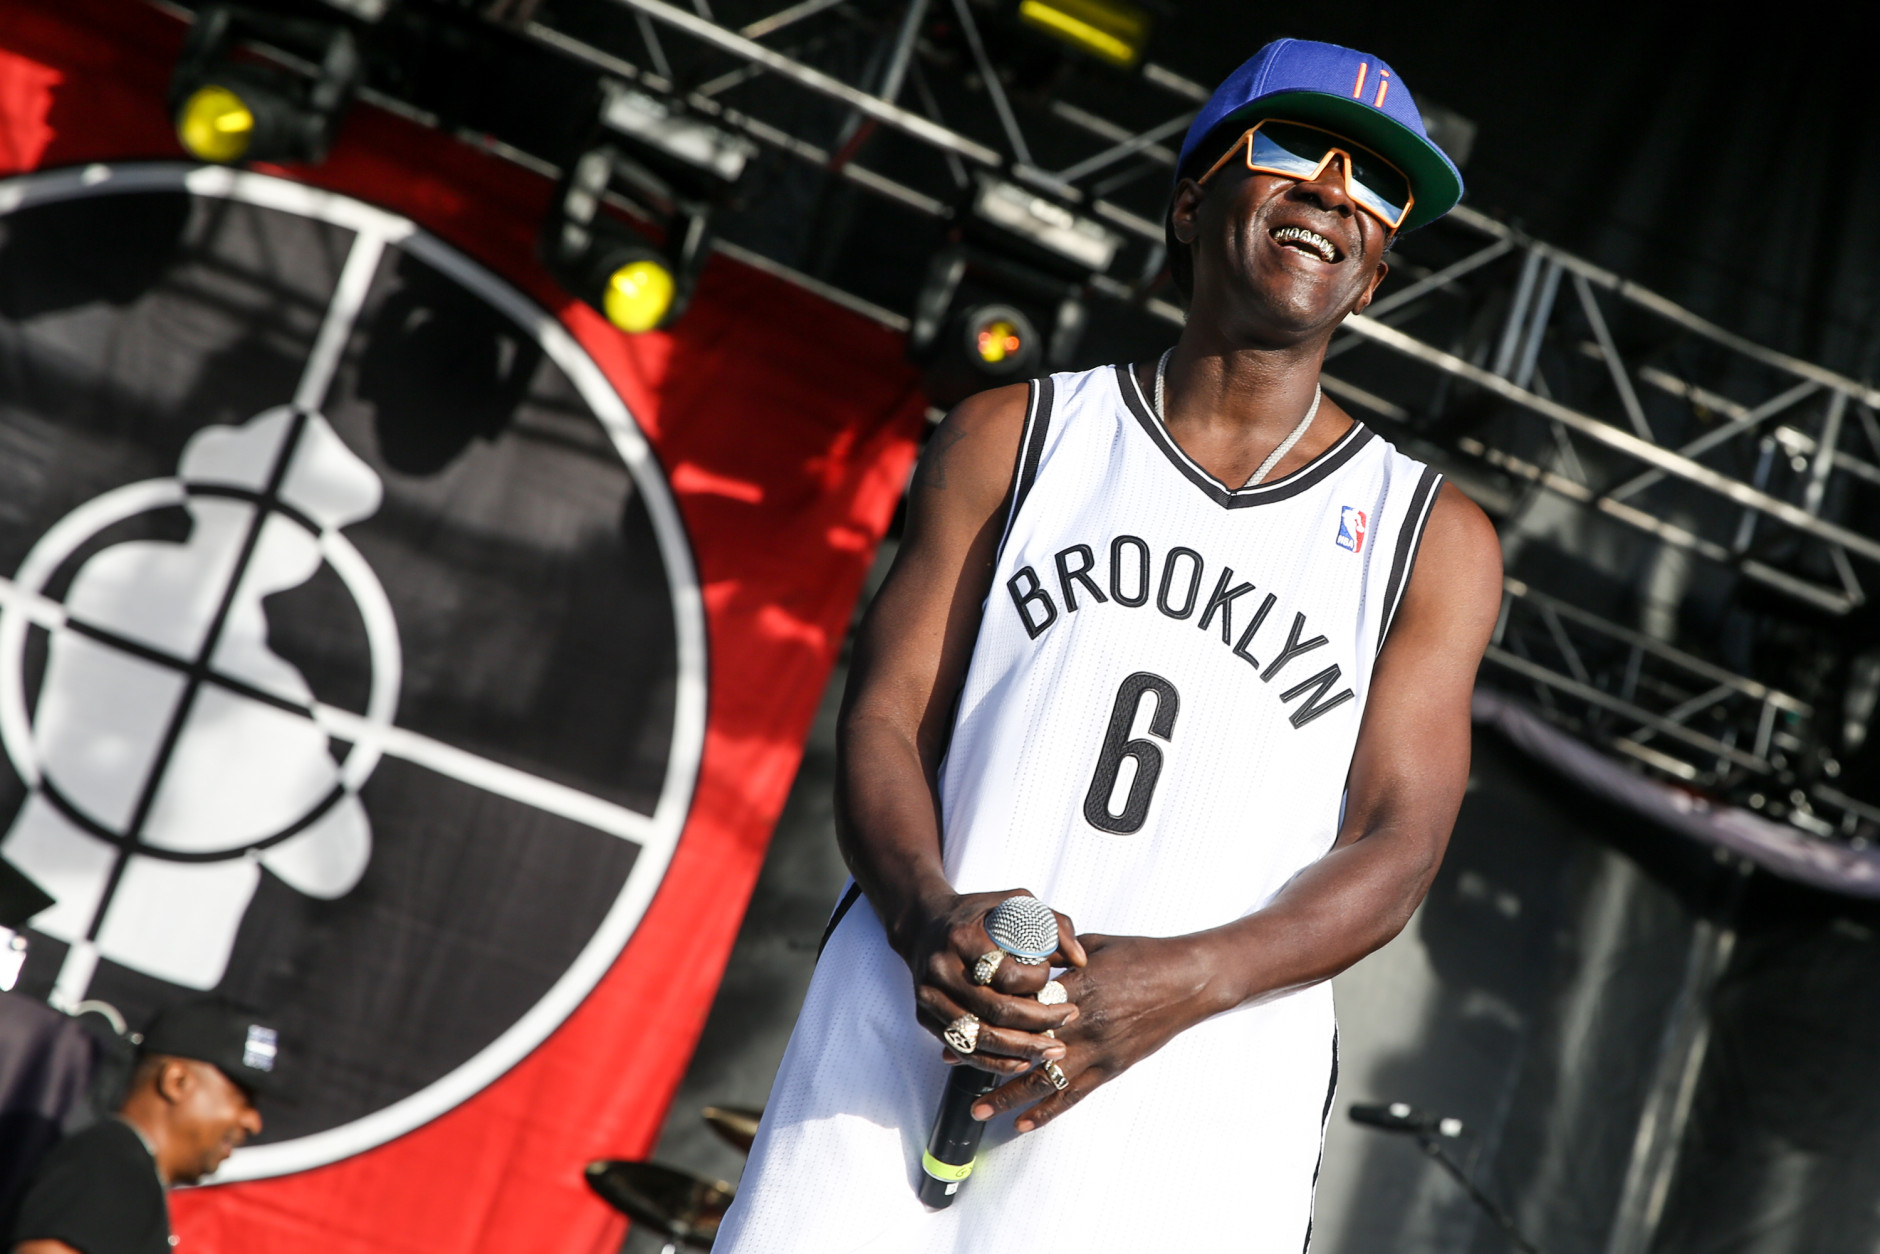 Flavor Flav of Public Enemy performs at the 2015 BottleRock Napa Valley Music Festival at the Napa Valley Expo on Friday, May 29, 2015, in Napa, Calif. (Photo by Rich Fury/Invision/AP)